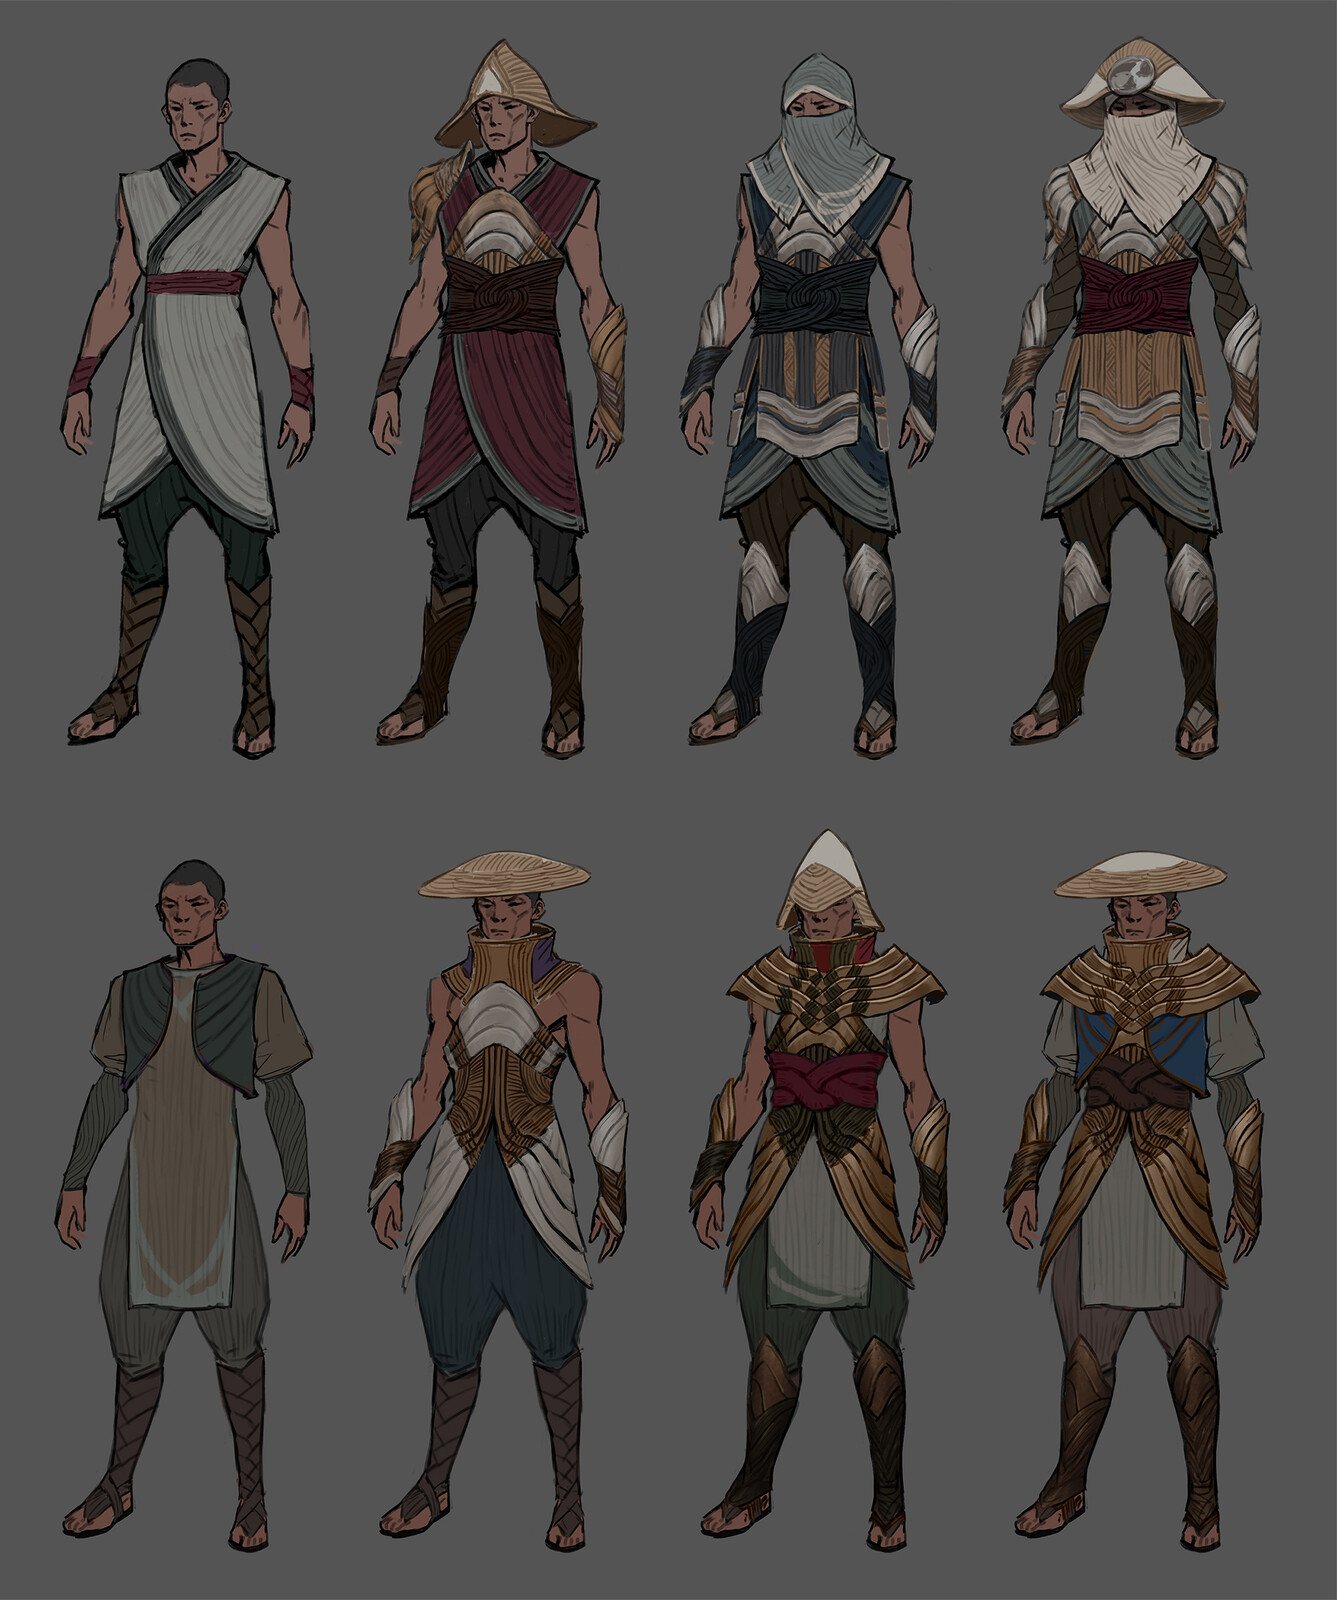 Ionian villager concepts.  These are made with interchangeable parts so they can be mixed and matched to make crowds.